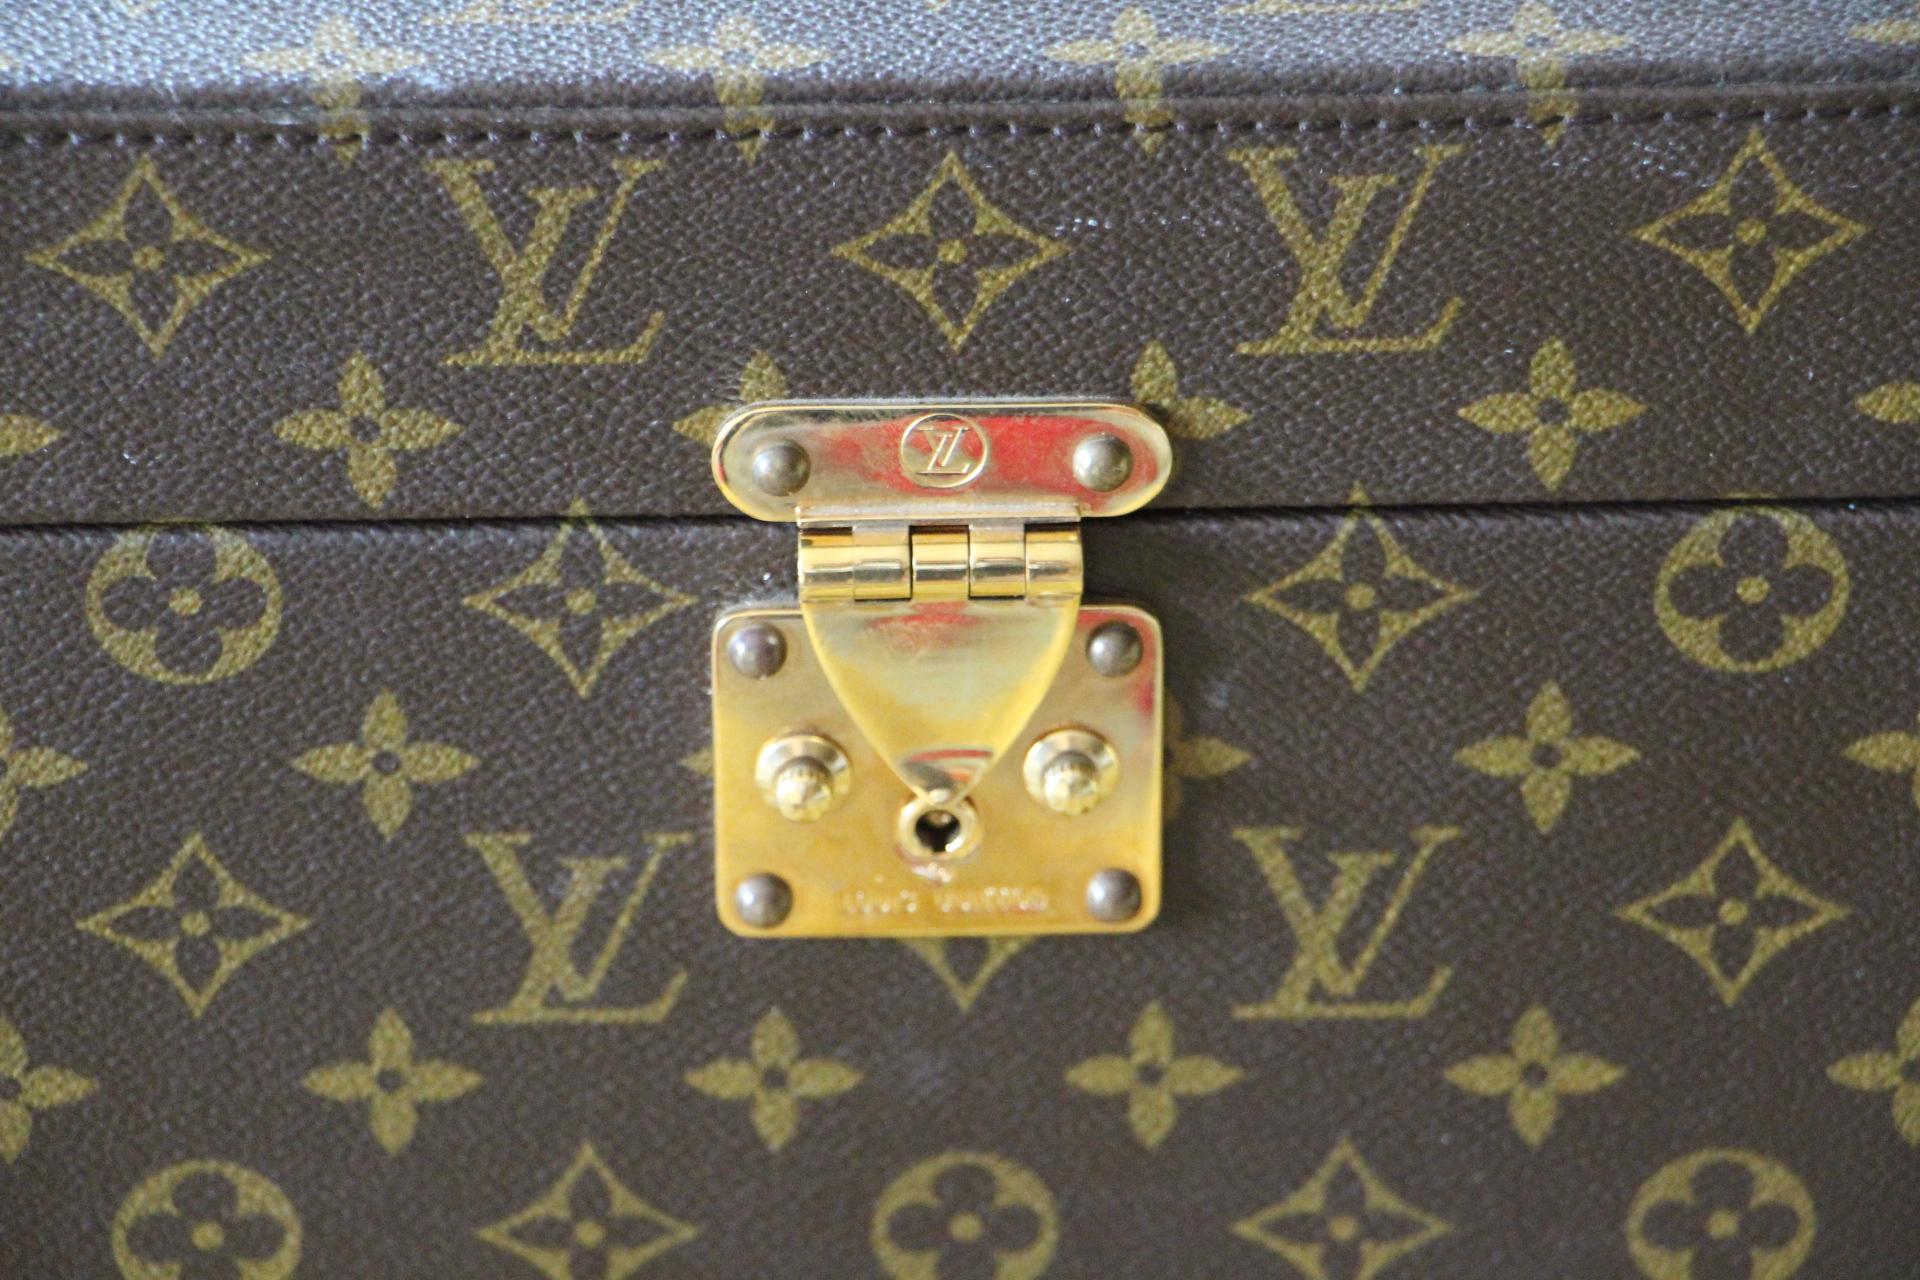 This rigid beauty case features monogram canvas and stamped Louis Vuitton brass lock. Its leather strap is adjustable and is also marked Louis Vuitton.
Interior, beige canvas, leather straps for holding materials. Under its lid there is a mirror.